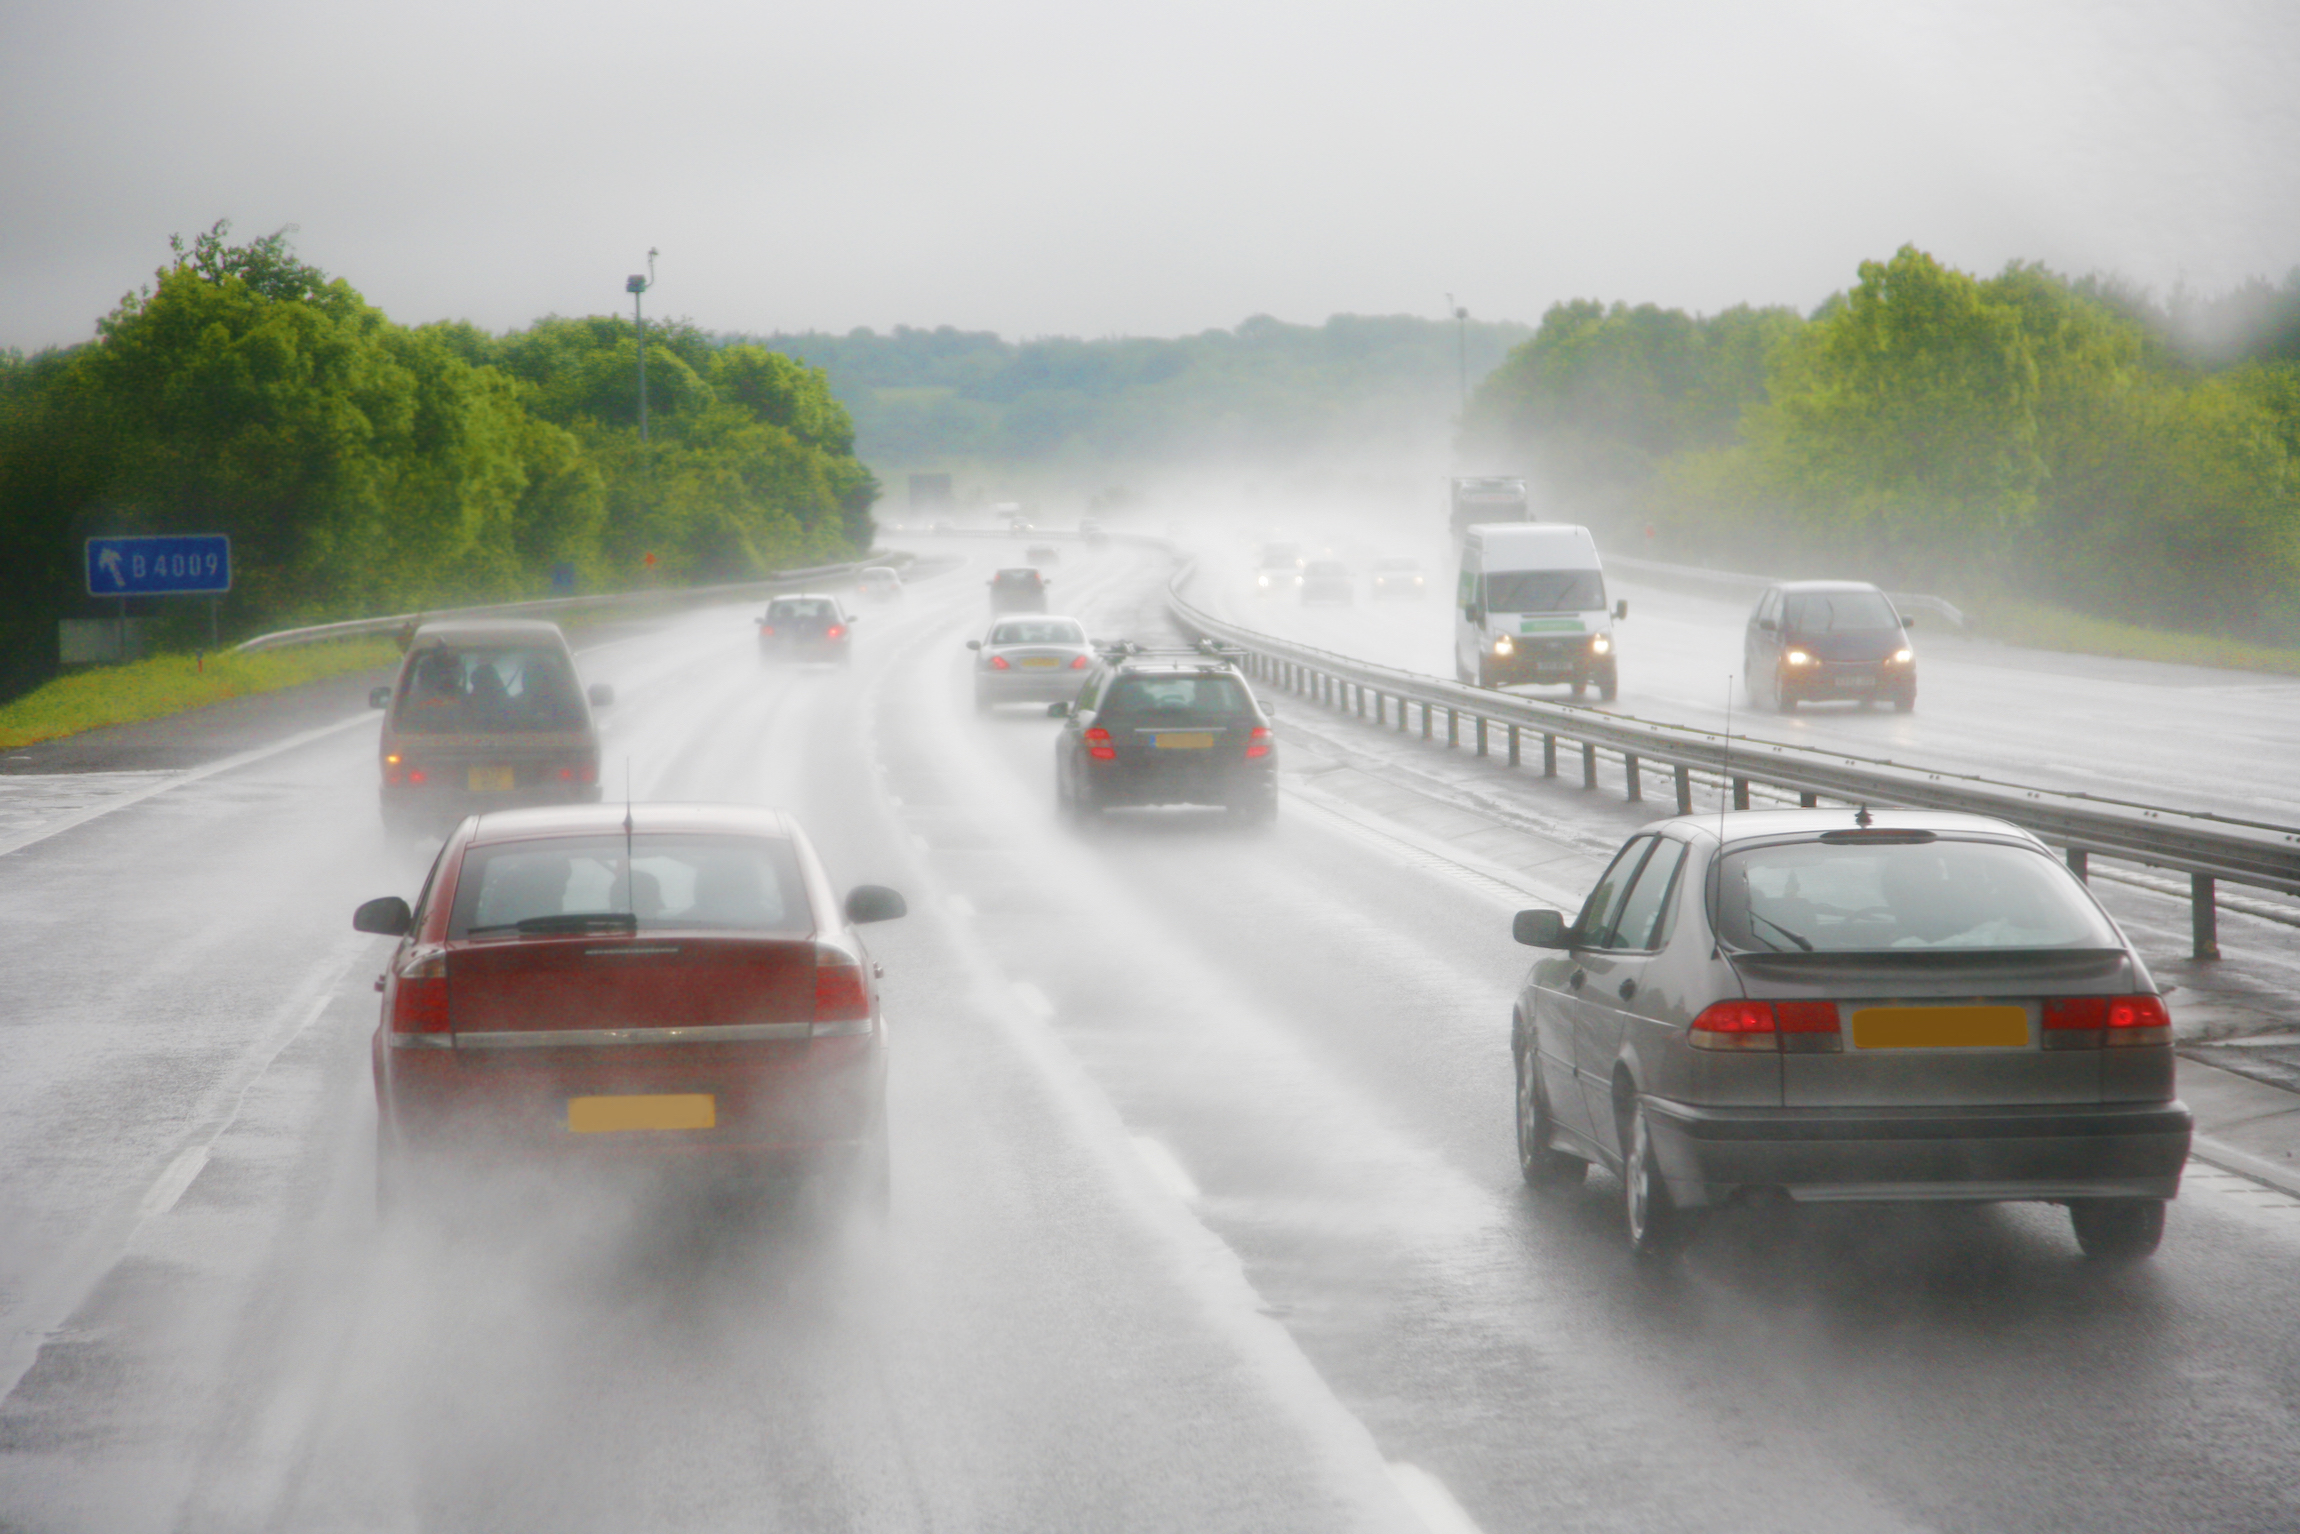 Heavy rain and traffic expected over Easter weekend in the Netherlands